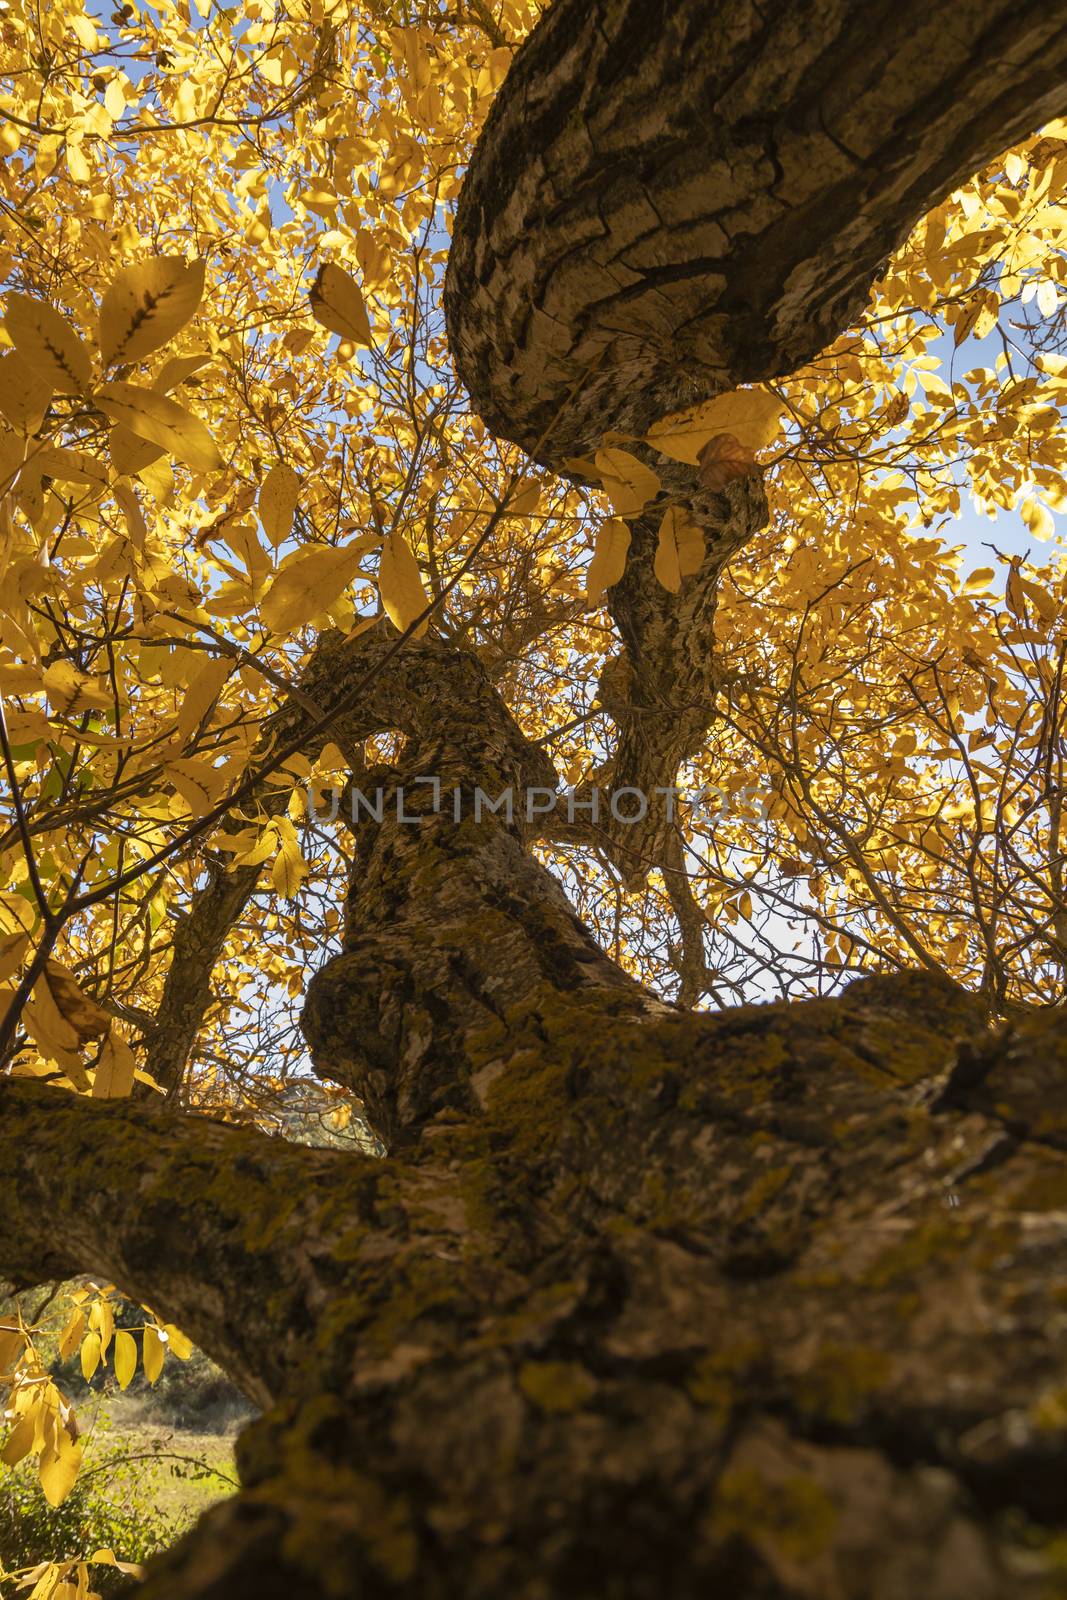 A beautiful walnut tree, dressed in autumn with yellow leaves, Spain by alvarobueno